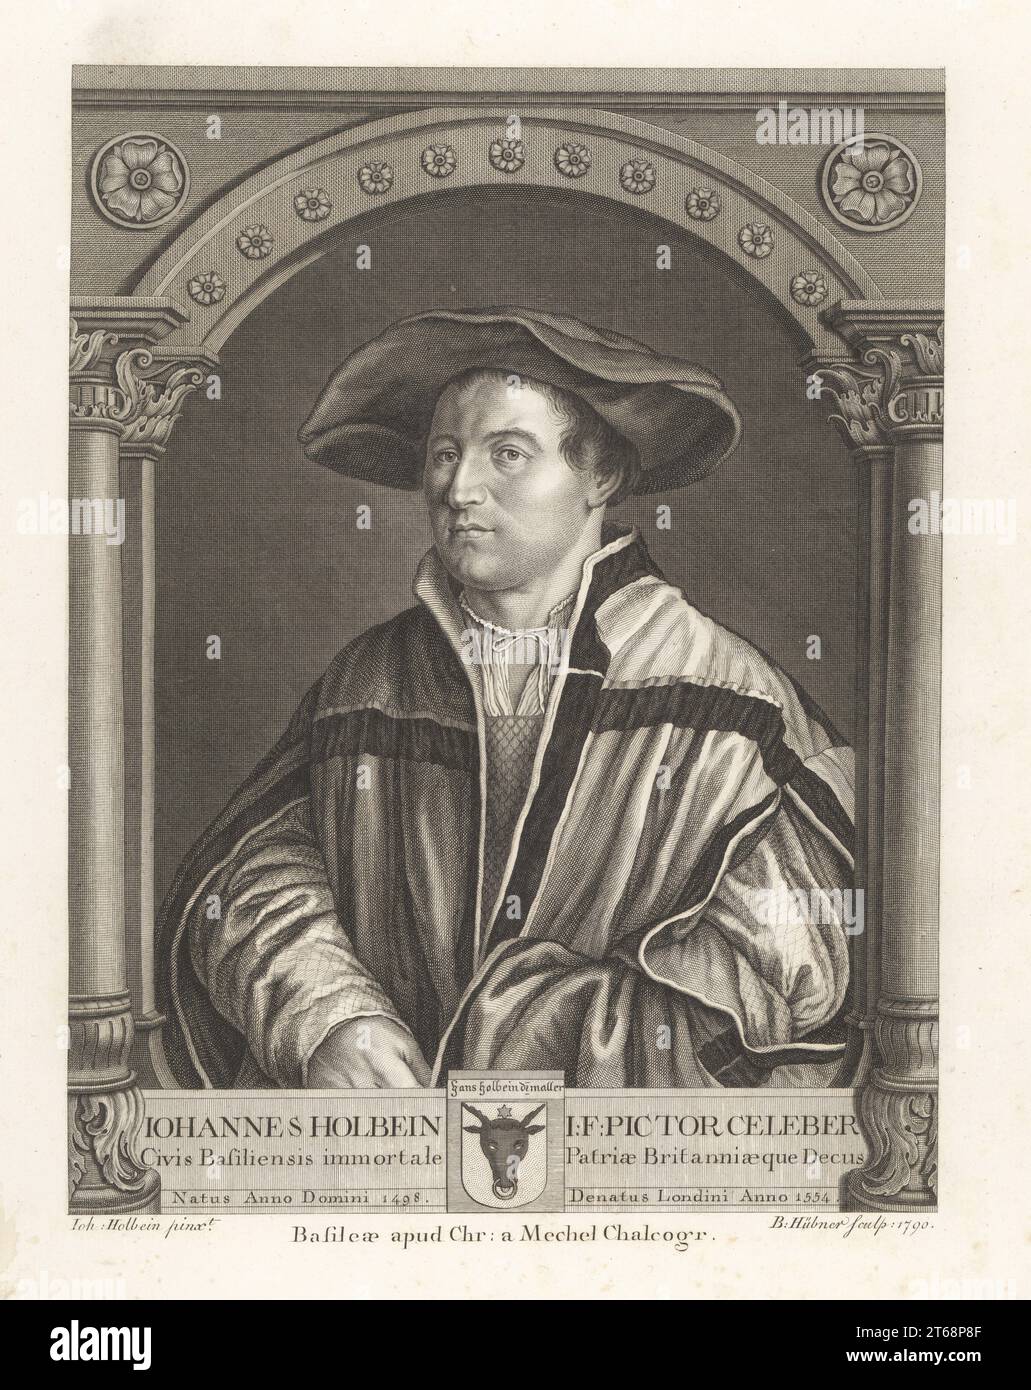 Self-portrait of Hans Holbein, 1498-1554, German Renaissance painter to the court of Henry VIII of England. In wide-brim hat, slit-sleeved mantle over doublet, under an arch with Tudor roses. Inscription: Johannes Holbein I.F. Pictor Celeber Civis Basilensis immortale Patriae Britanniaeque Decus. Copperplate engraving by Bartholomaus Hubner after a self-portrait by Hans Holbein in Christian von Mechel's Oeuvre de Jean Holbein, Chez Guillaume Haas, Basel, 1790. Stock Photo